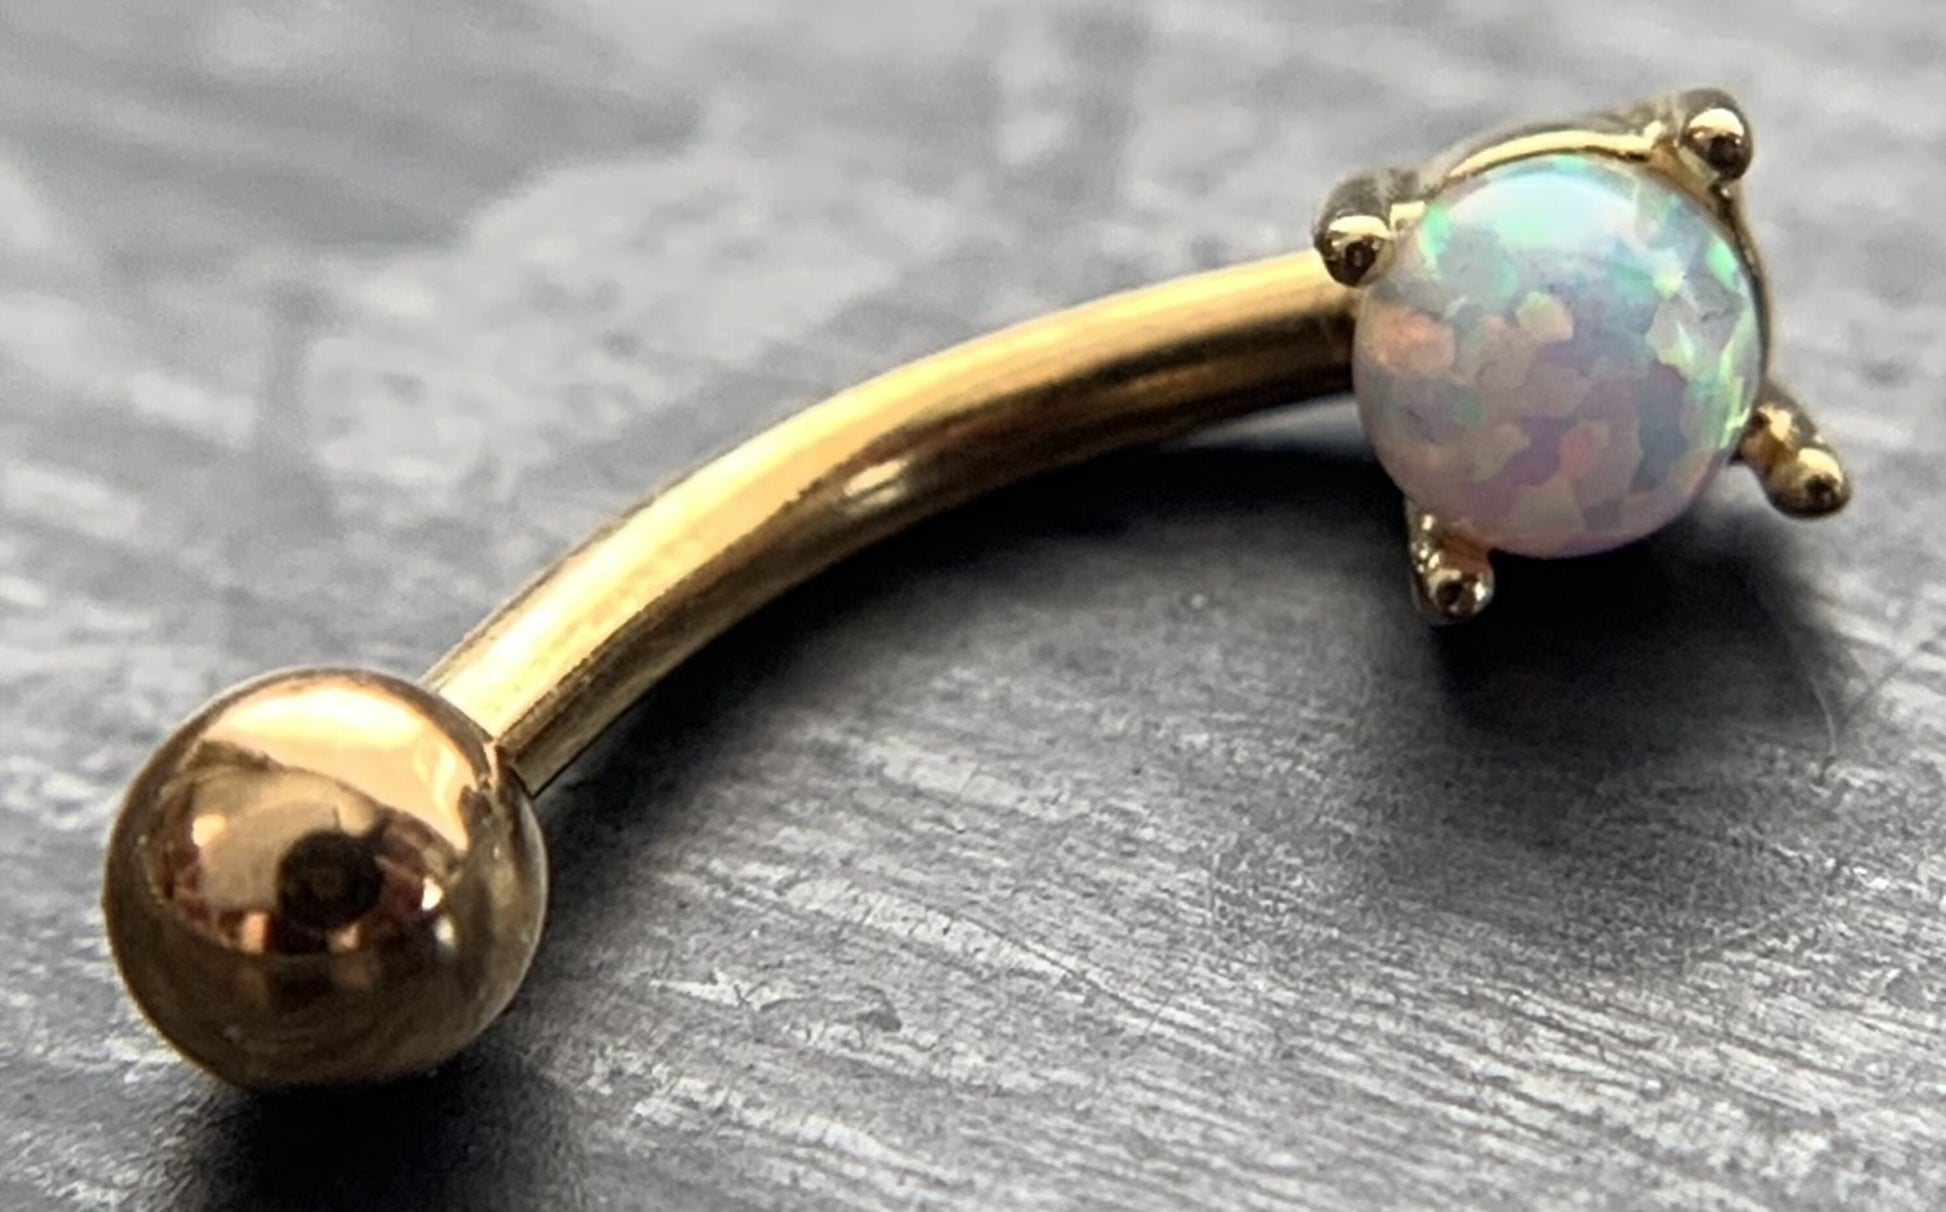 1 Piece Stunning Prong Set 3mm Opal Curved Barbell Eyebrow Ring - 16g - Blue, Purple, White, Gold and Rose Gold Available!